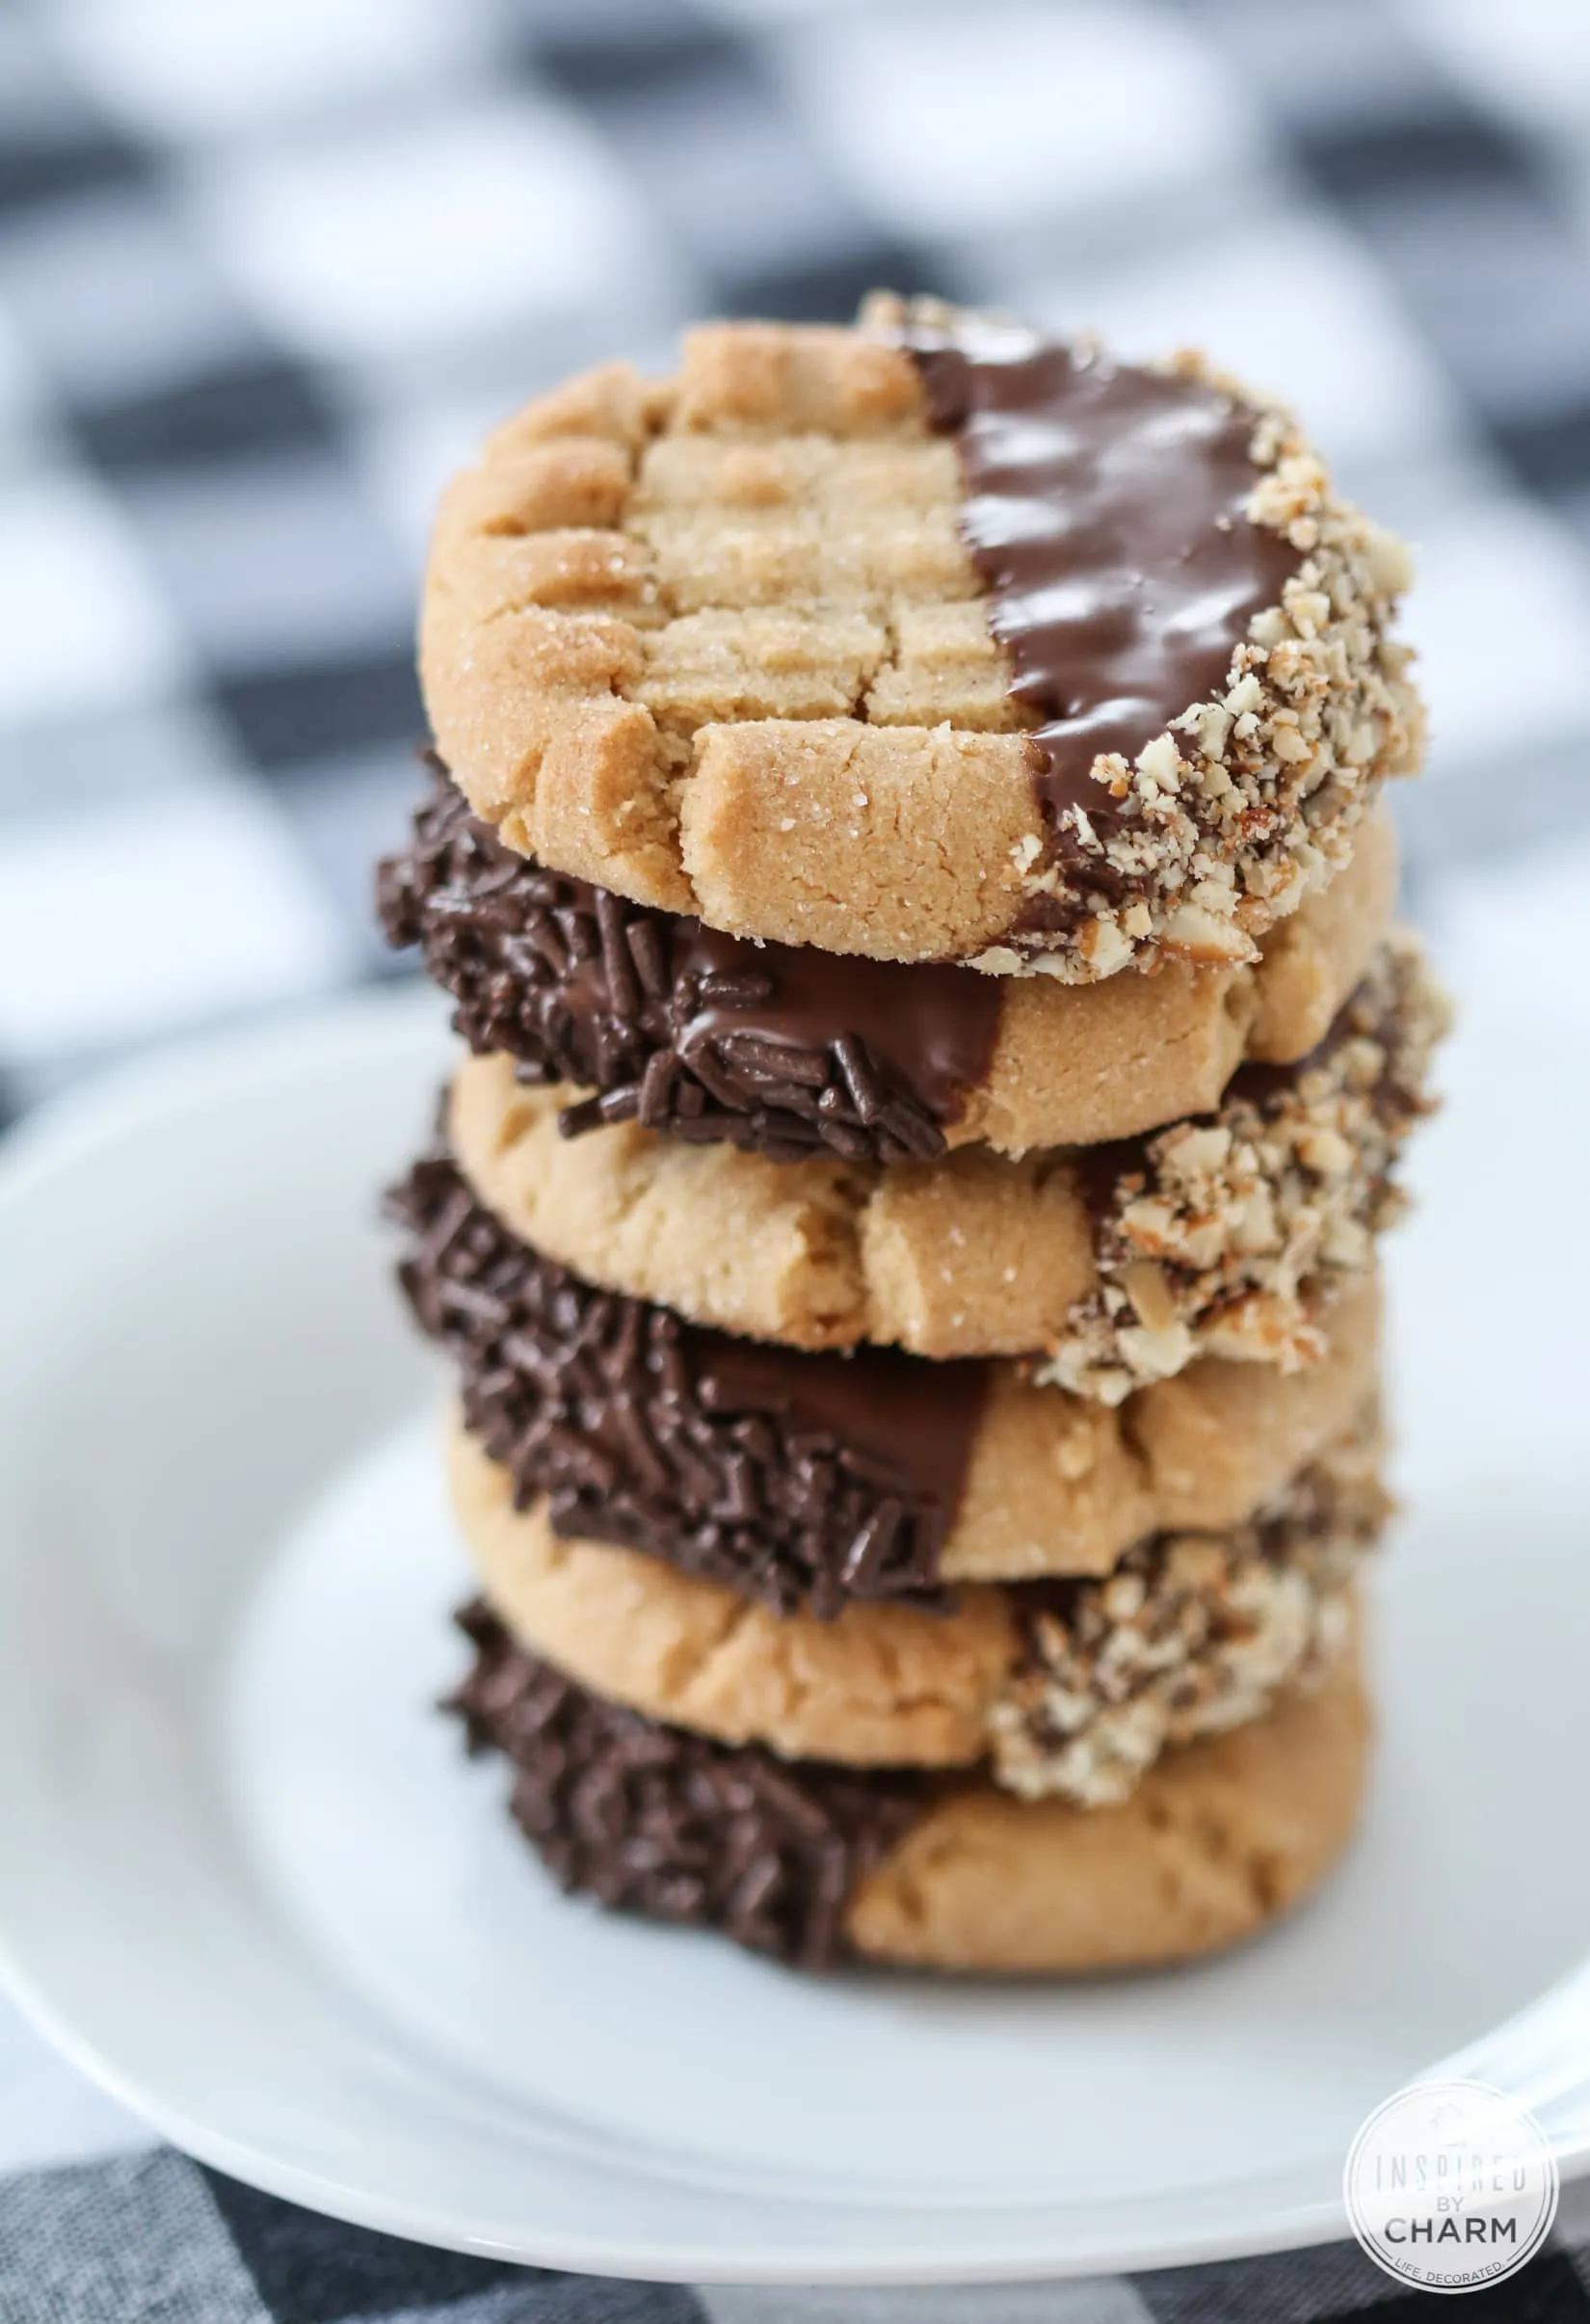 Chocolate-Dipped Peanut Butter Cookies - Inspired by Charm